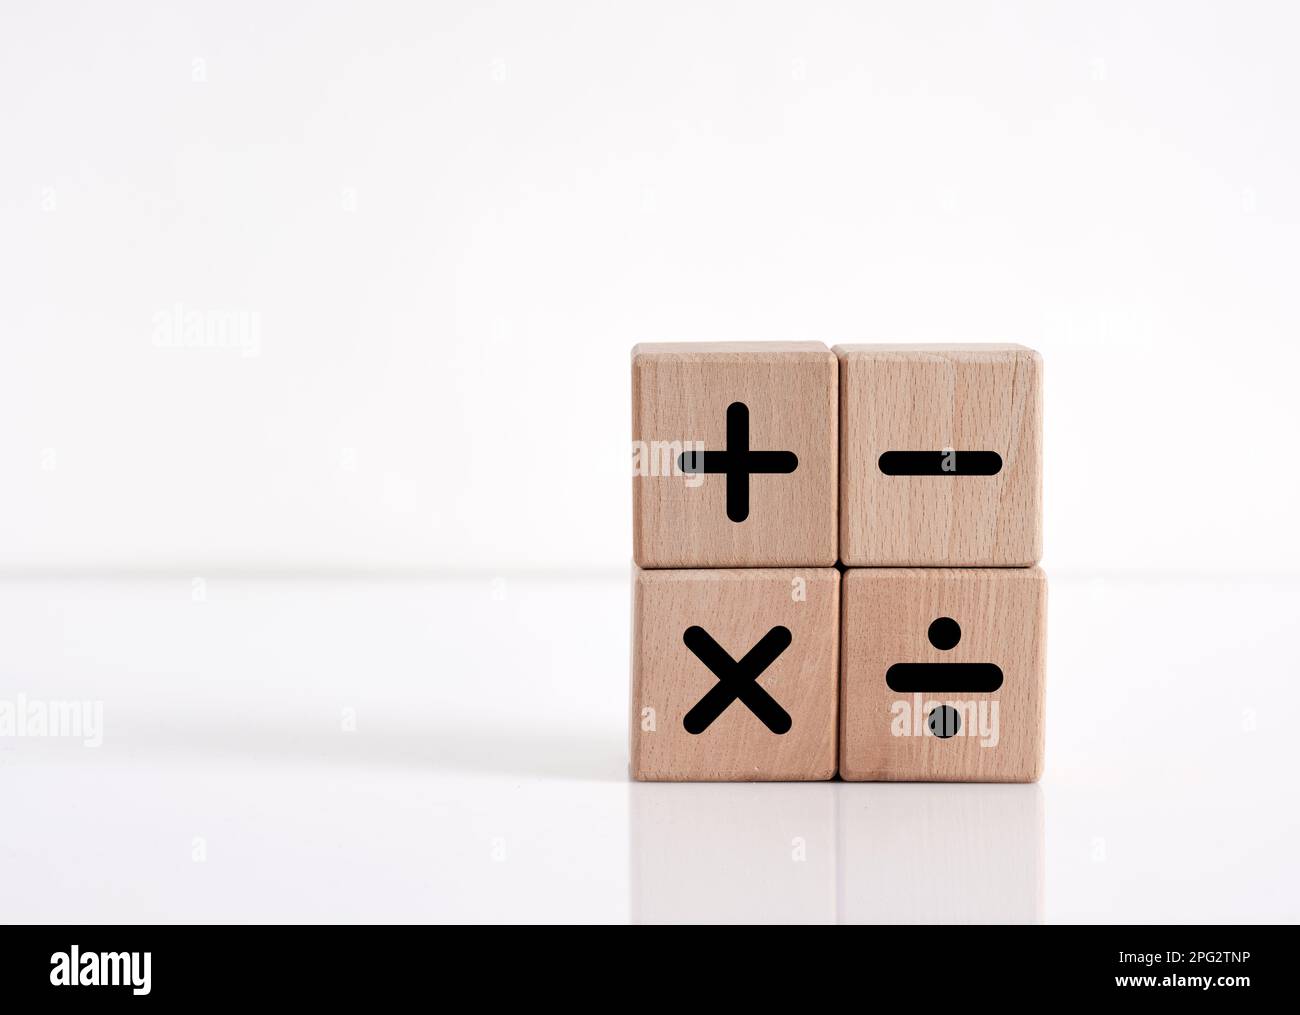 Basic mathematical operations symbols. Plus, minus, multiply and divide symbols on wooden cubes on white background. Mathematic or math education and Stock Photo